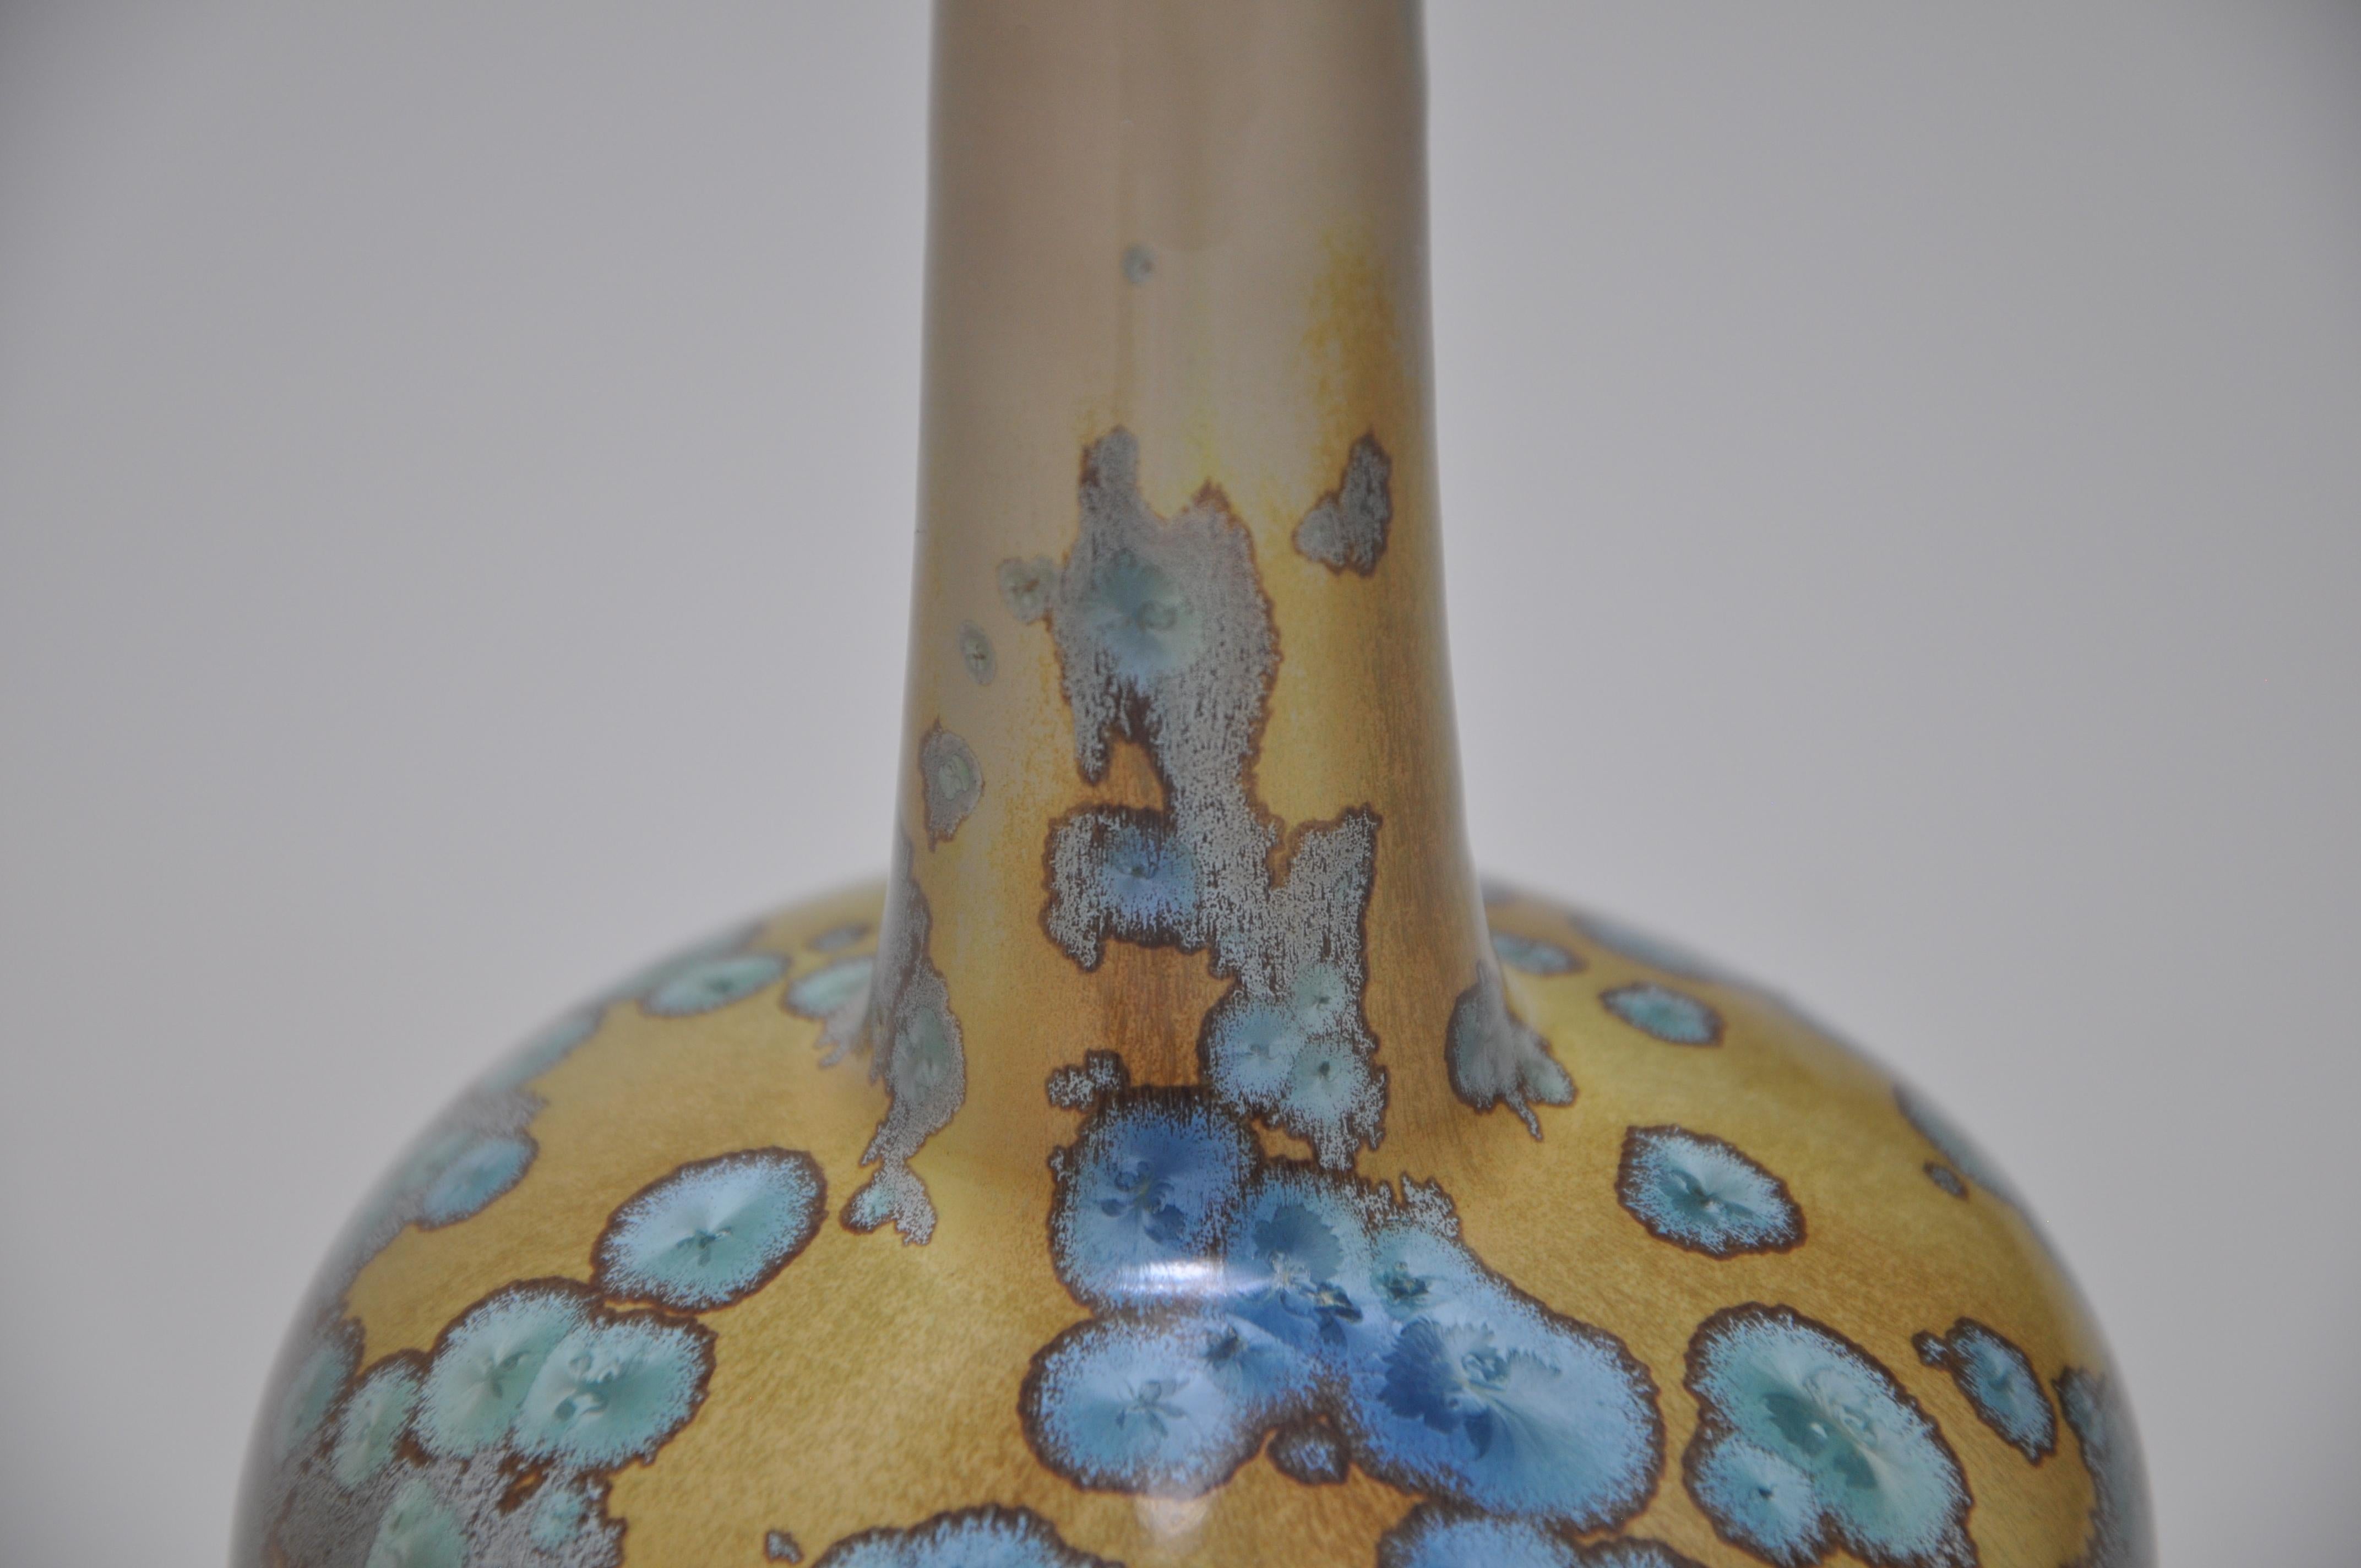 Rare French Art Nouveau Green Blue Yellow Ceramic Vase Pot by Alfred Renoleau In Excellent Condition For Sale In Belfast, Northern Ireland